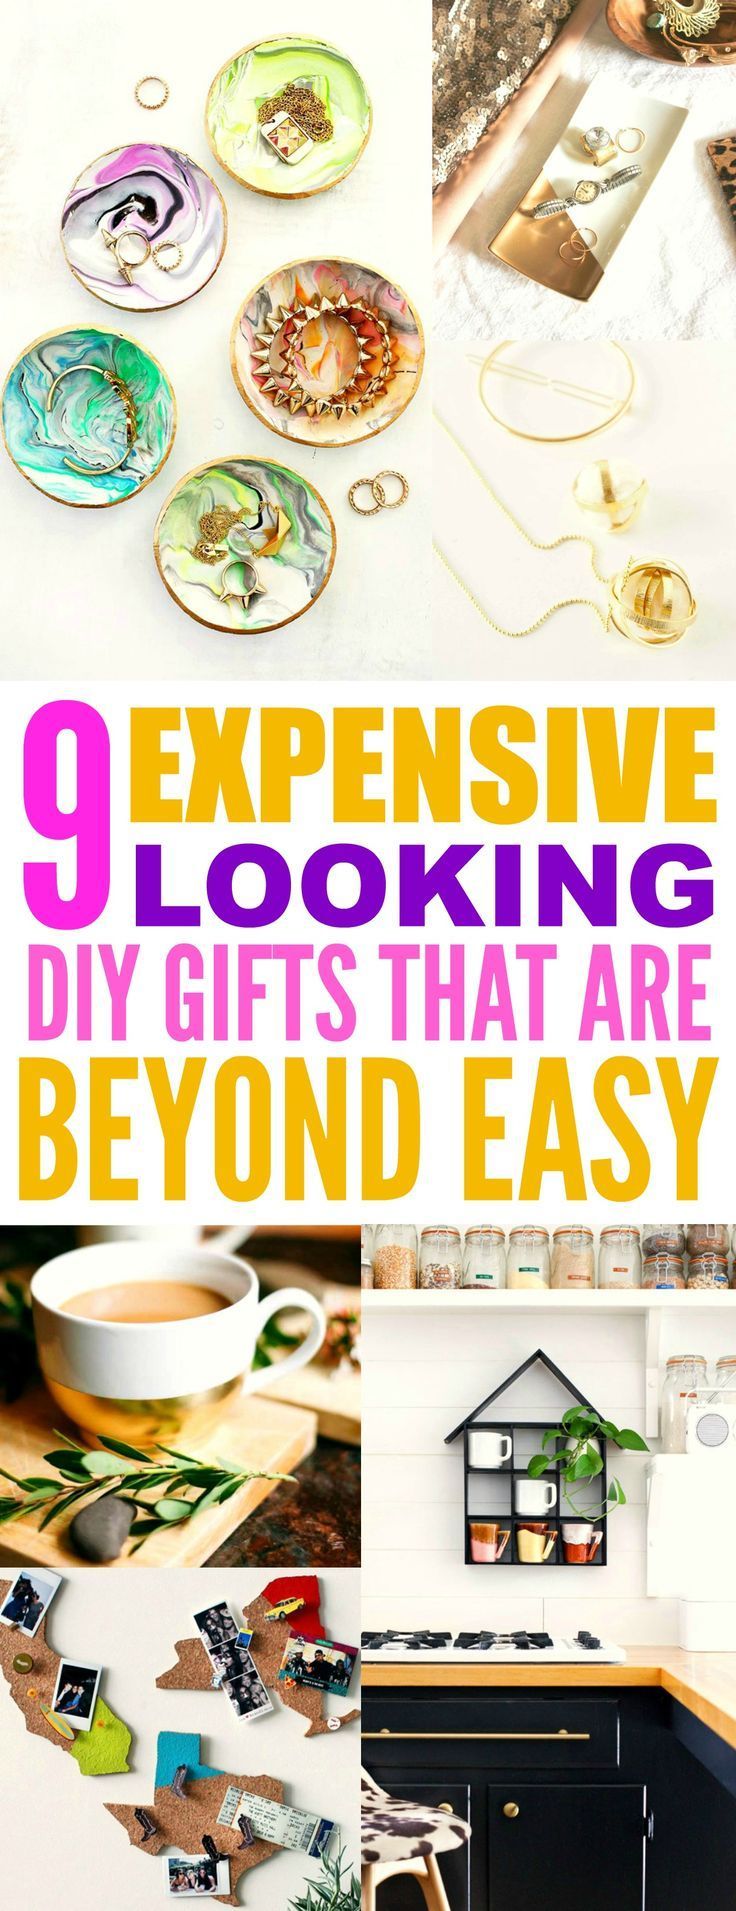 9 Expensive Looking Easy DIY Gifts -   diy Gifts for friends